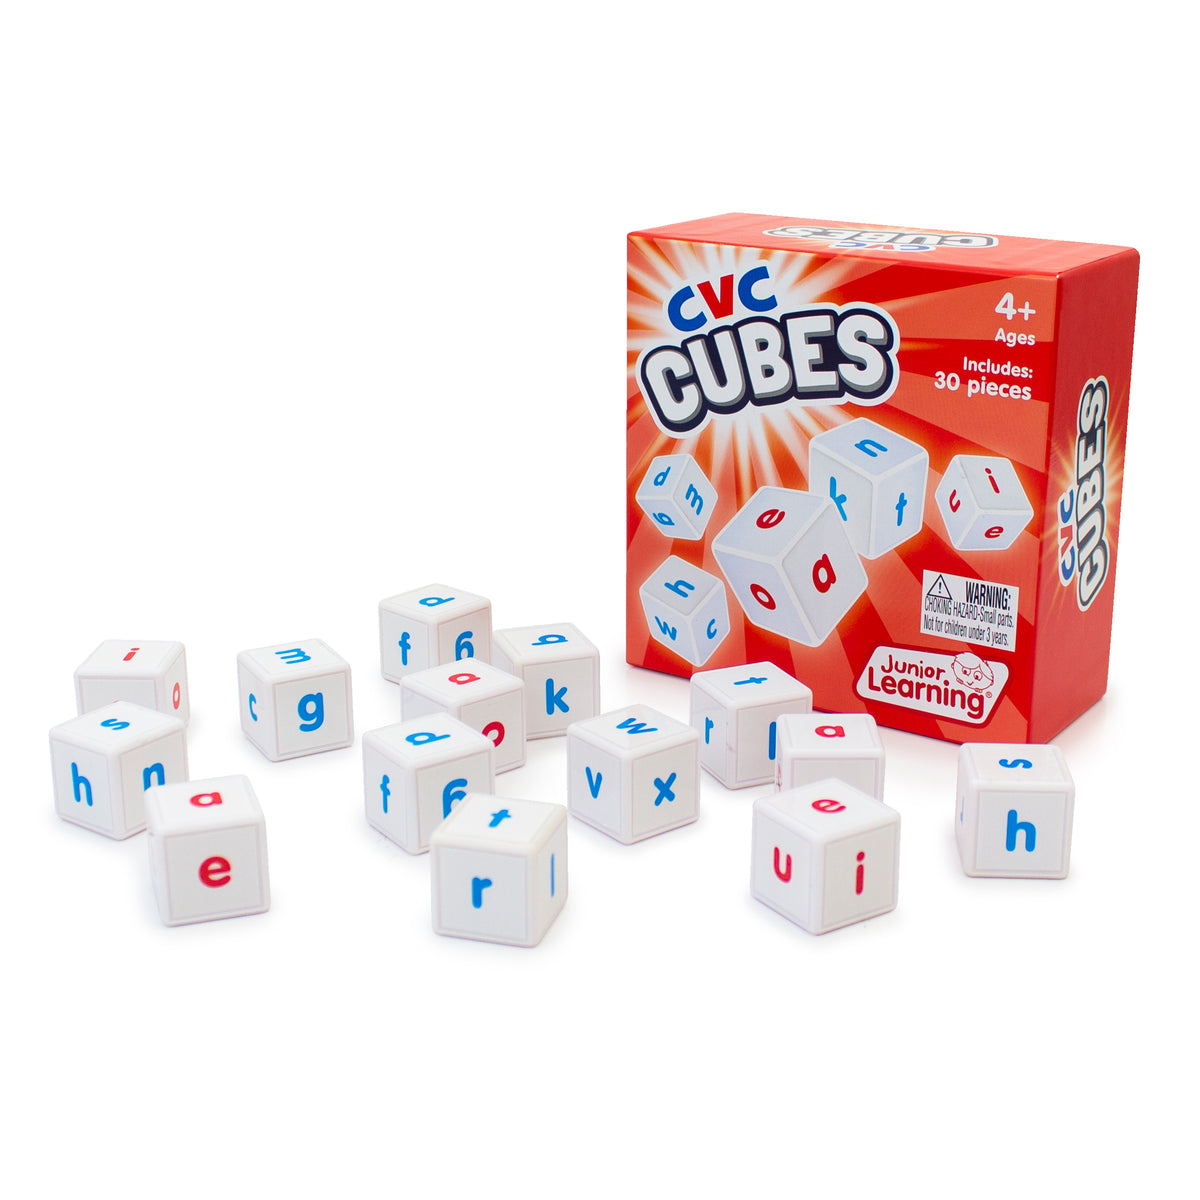 Junior Learning JL643 CVC Cubes box and content